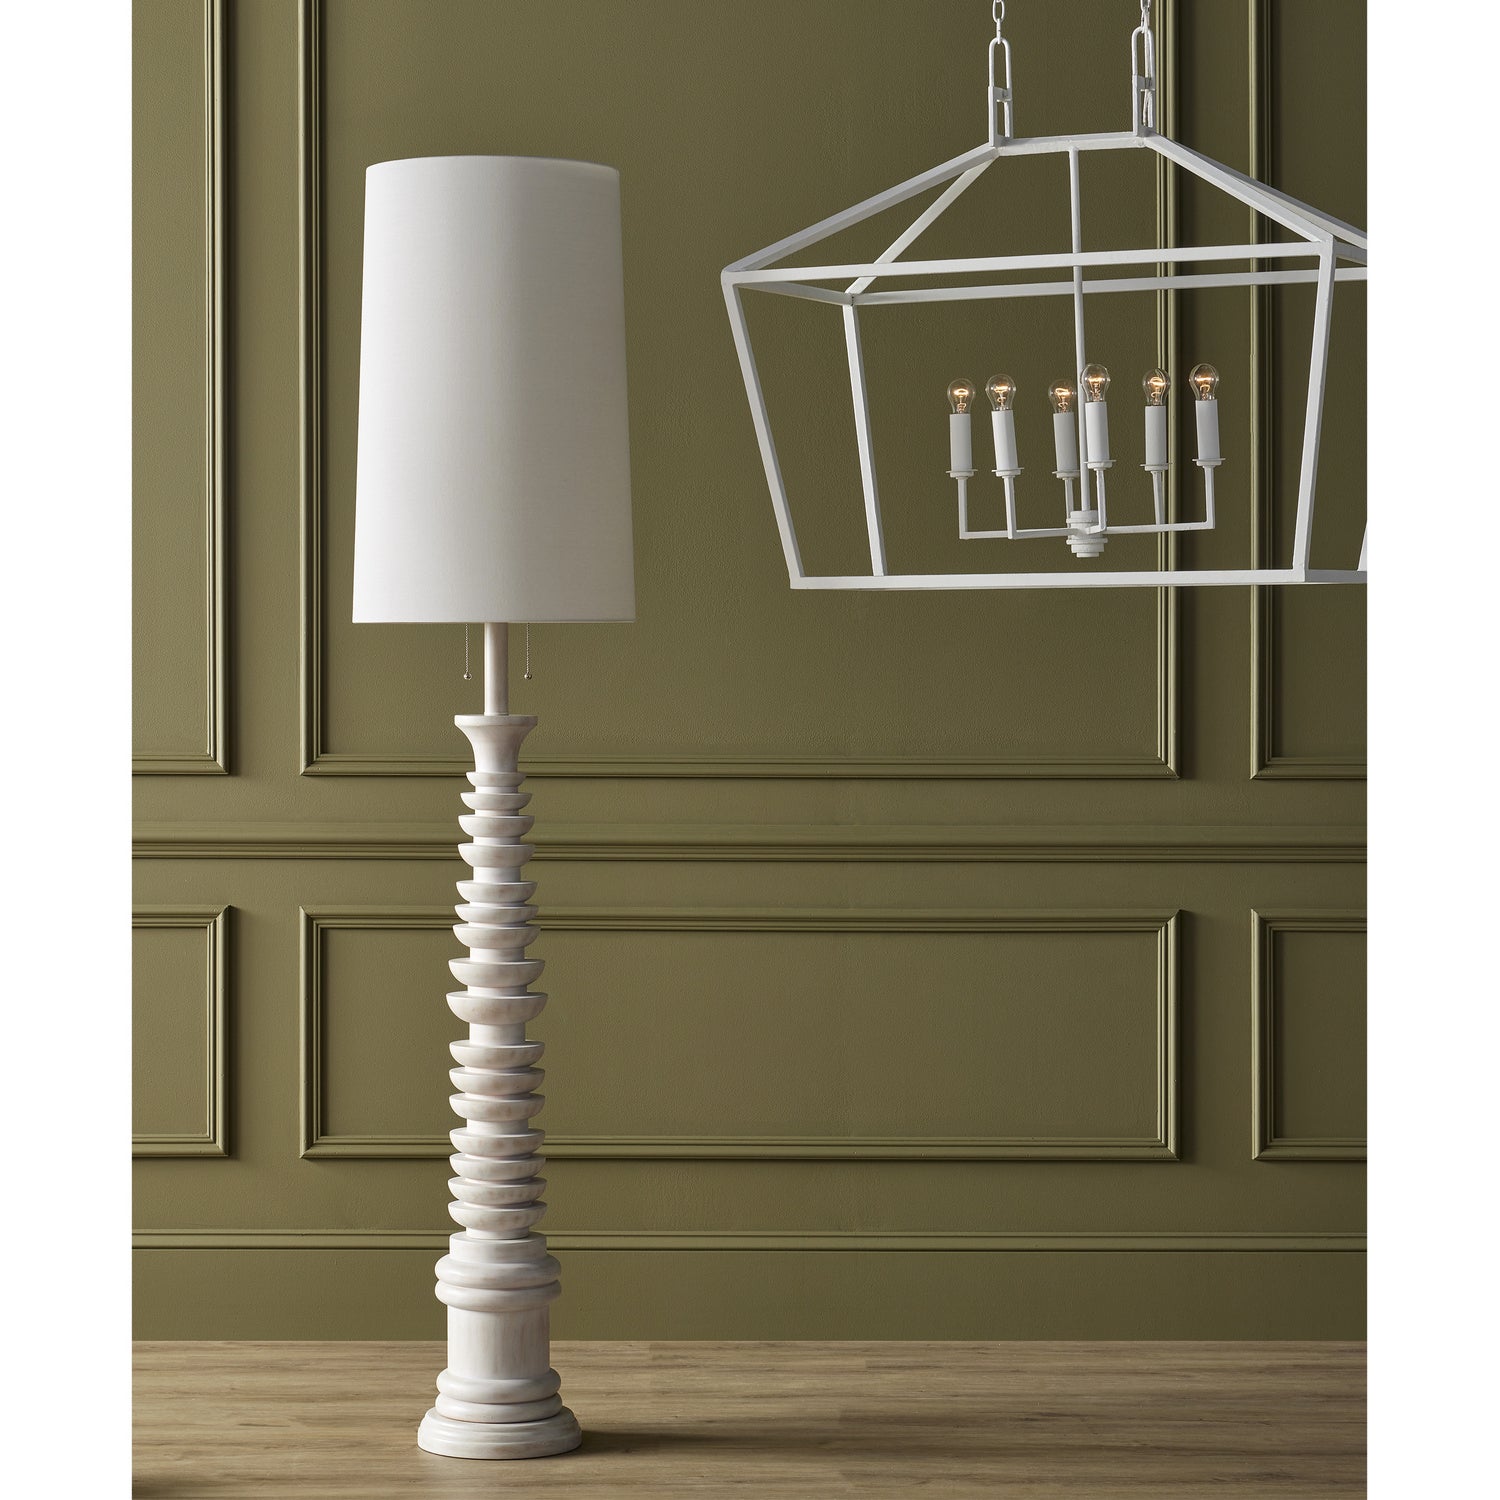 Two Light Floor Lamp from the Phyllis Morris collection in Whitewash finish